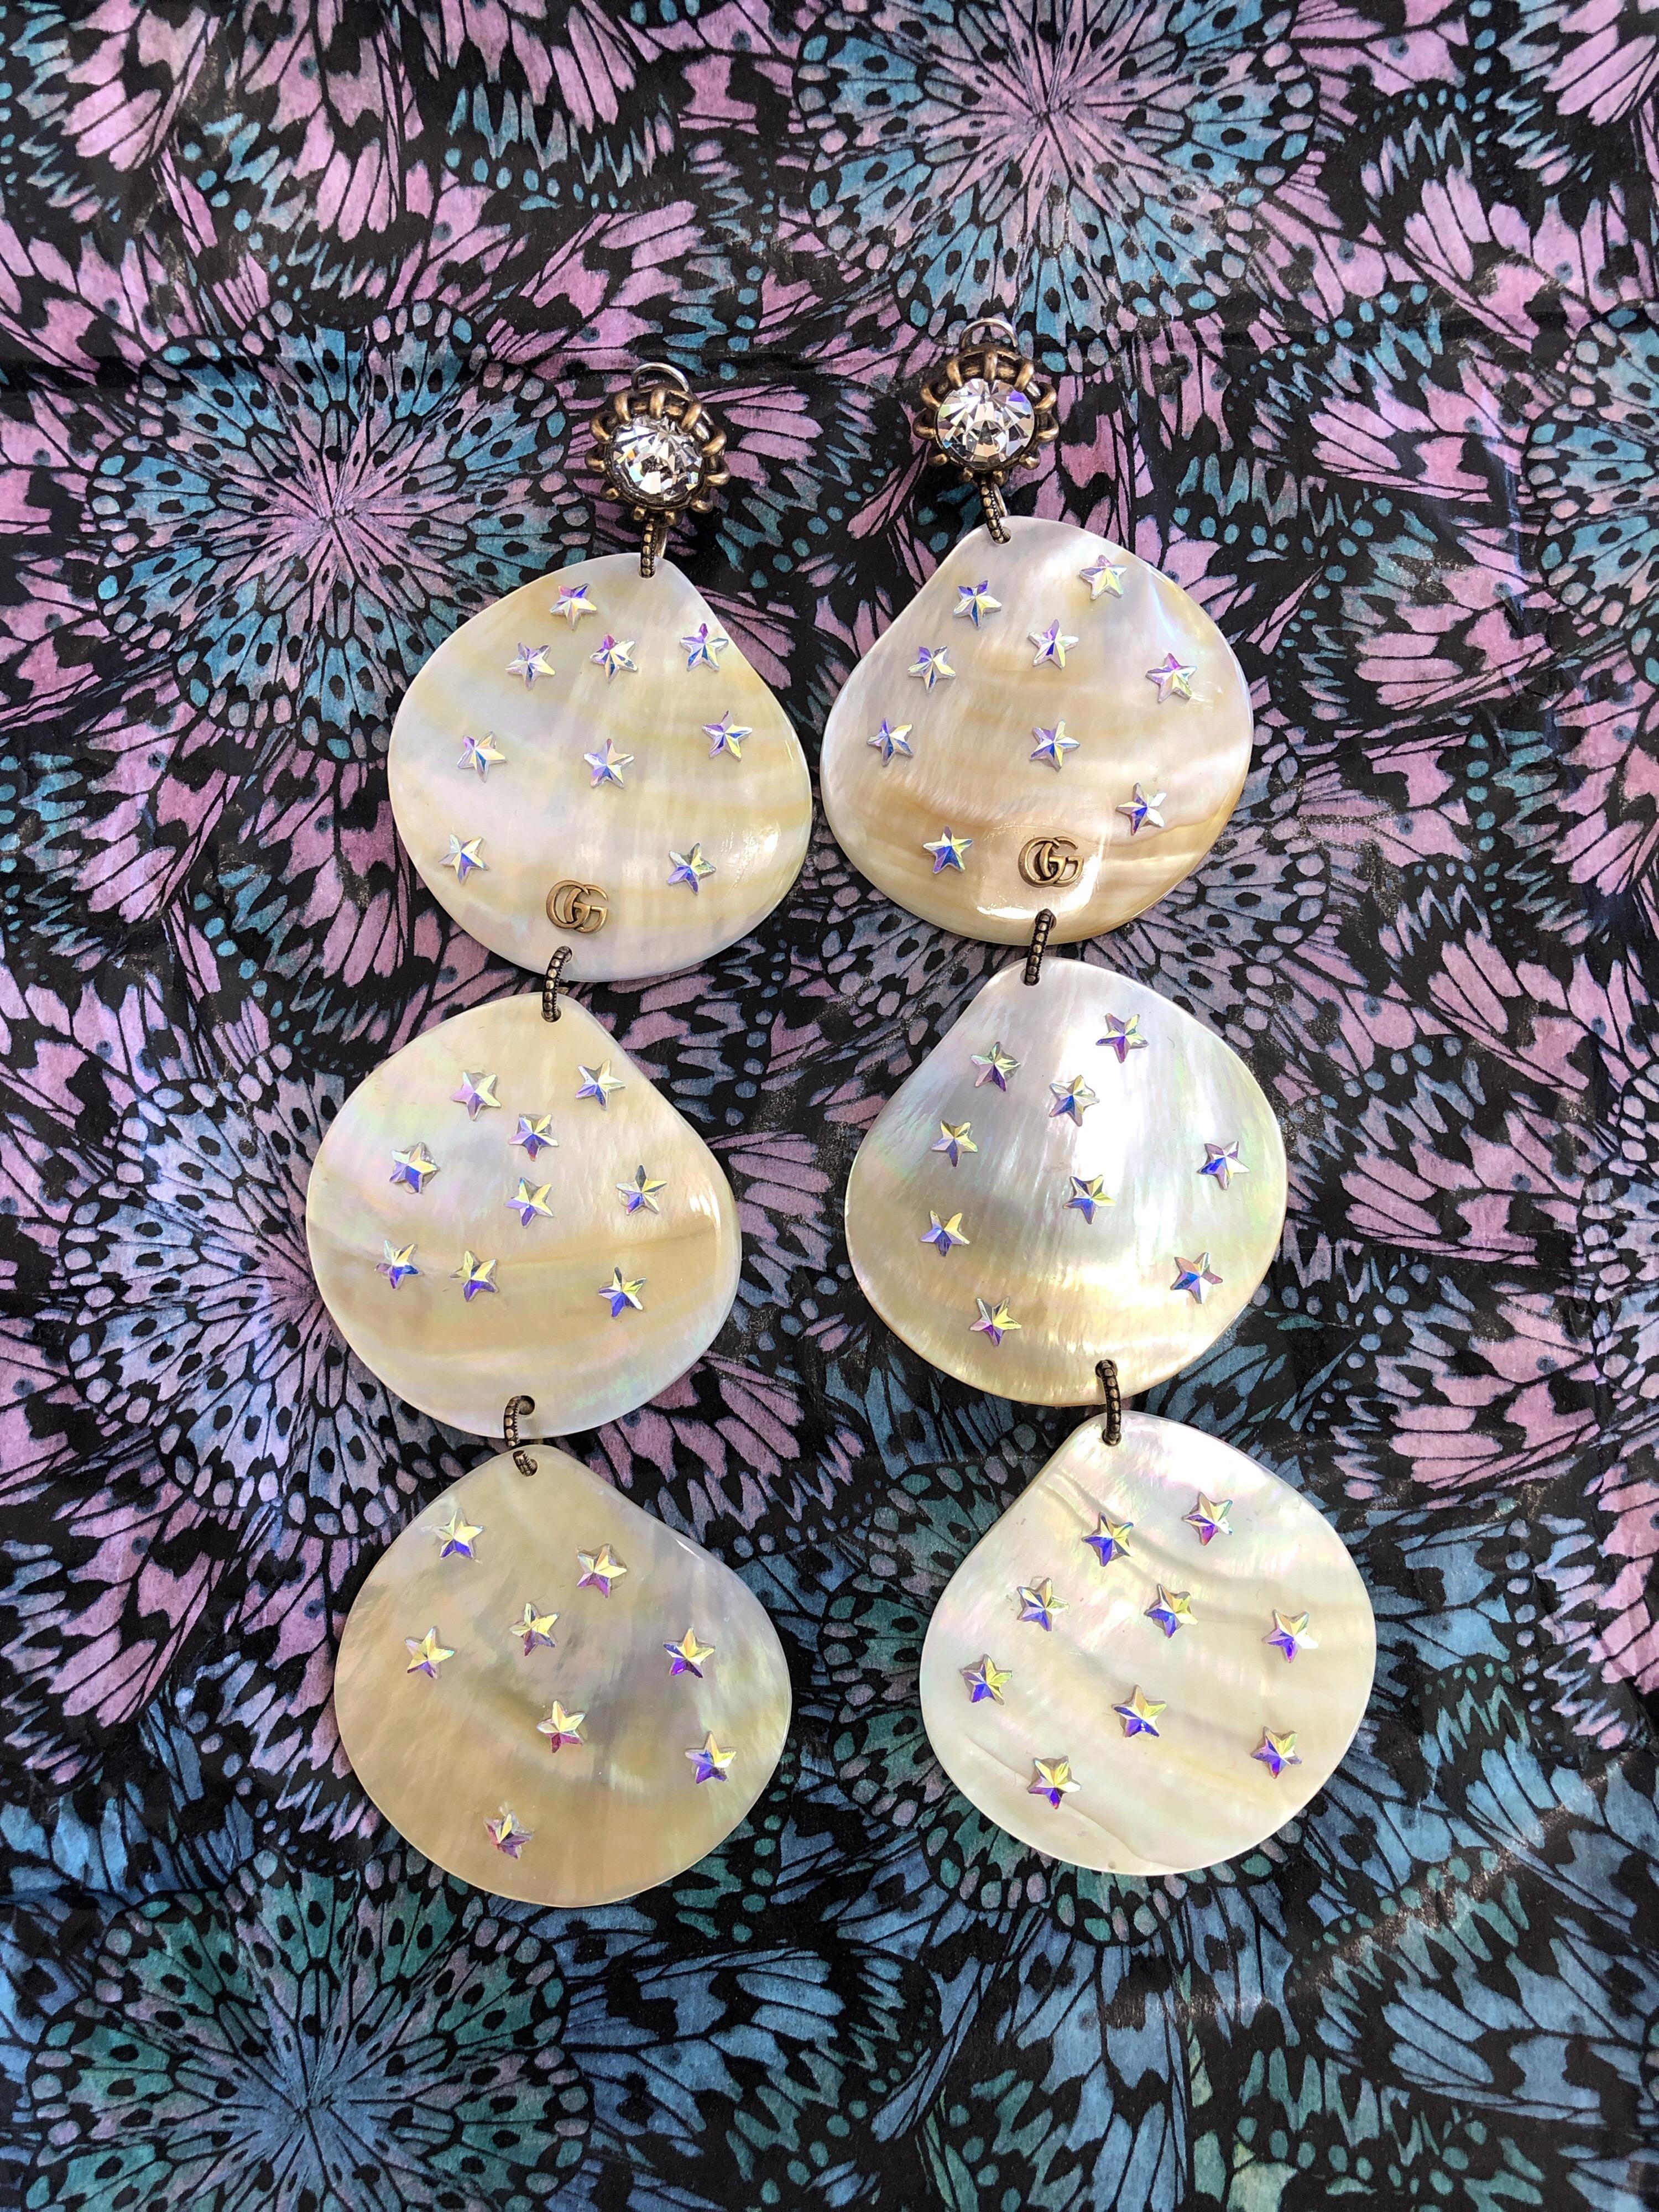 Presented on the Cruise 2019 runway, these statement pendant earrings are made from natural mother of pearl shell, achieving a one-of-a-kind finish for each unique piece. Dangling from faceted crystals, three tiered shells are each dotted with